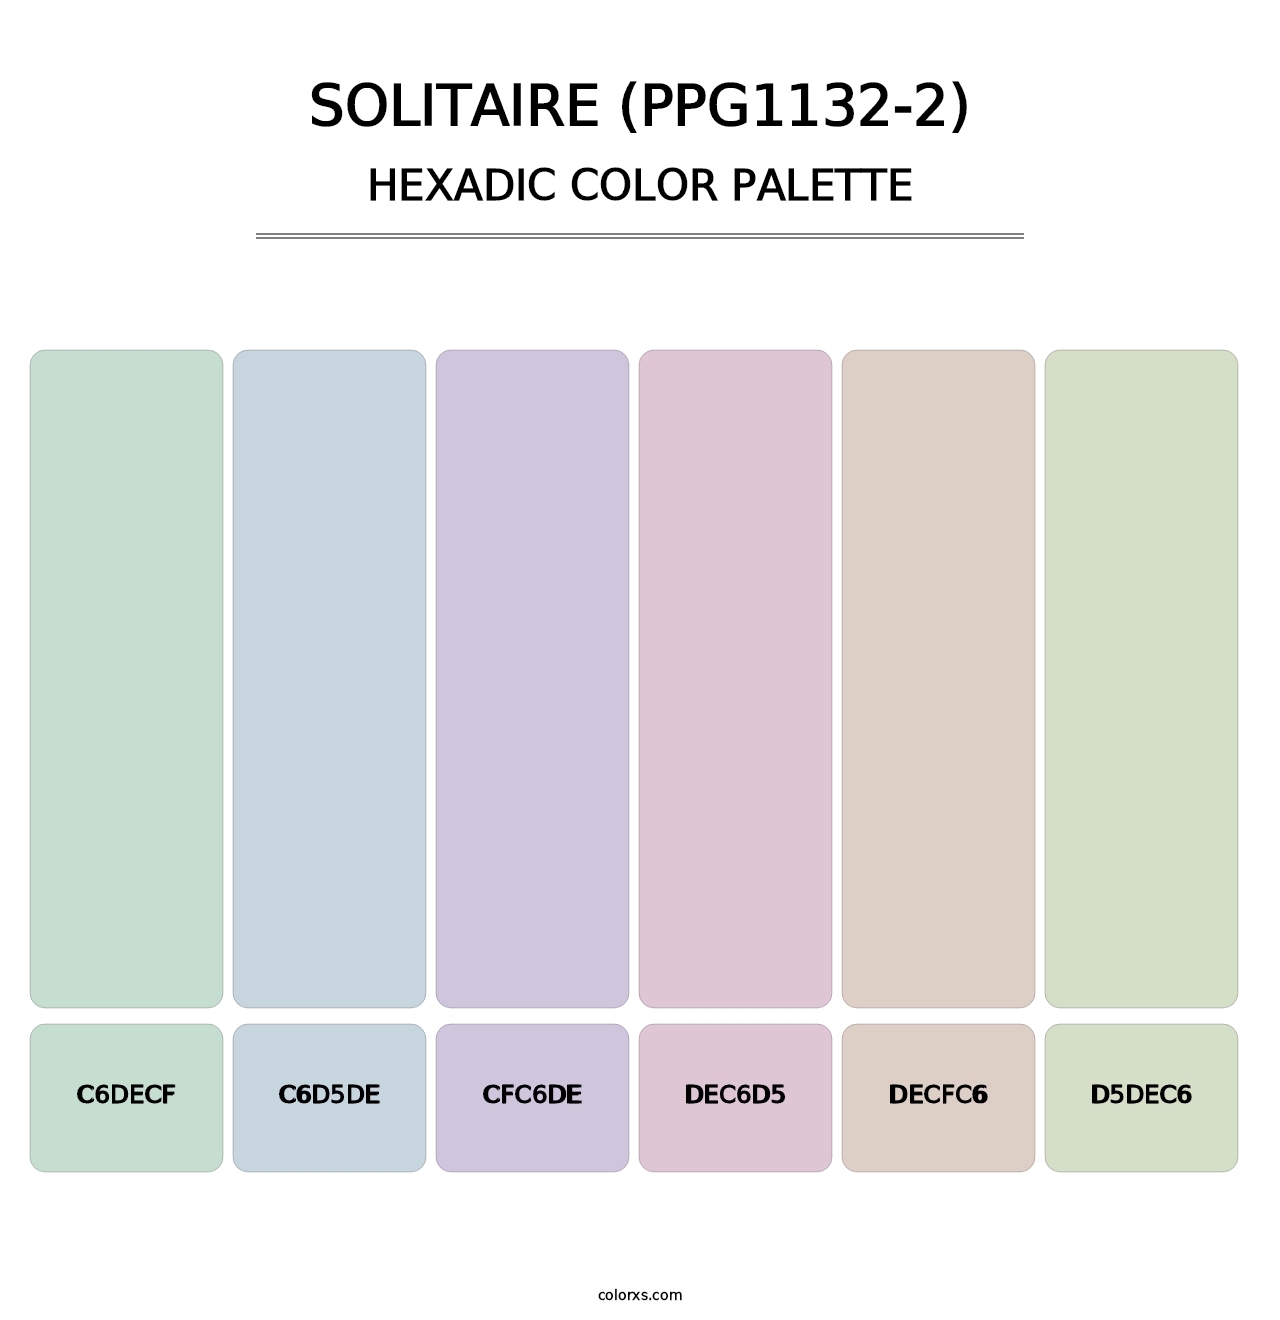 Solitaire (PPG1132-2) - Hexadic Color Palette